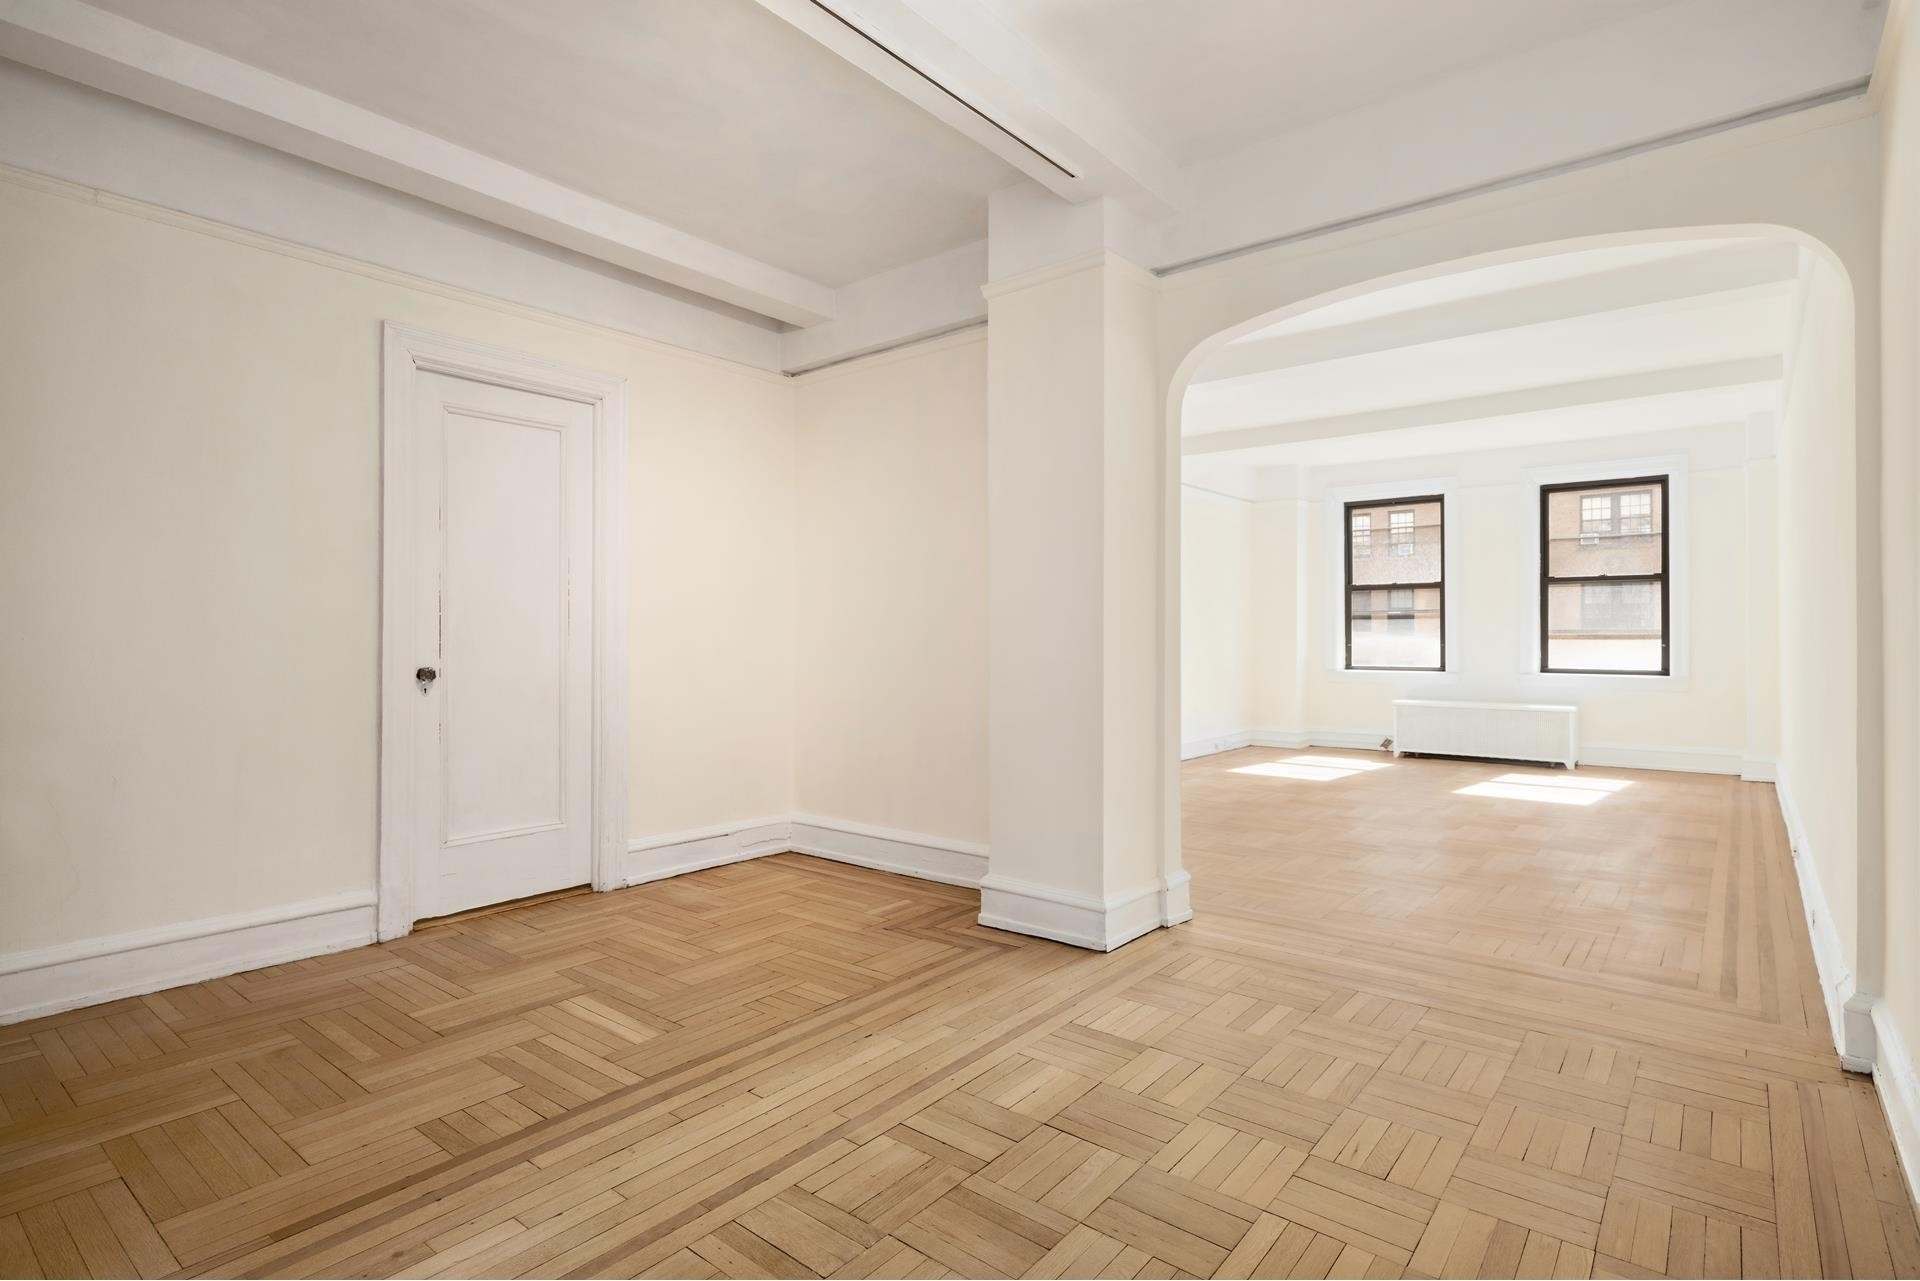 Co-op Properties for Sale at 171 W 79TH ST, 51 Upper West Side, New York, New York 10024